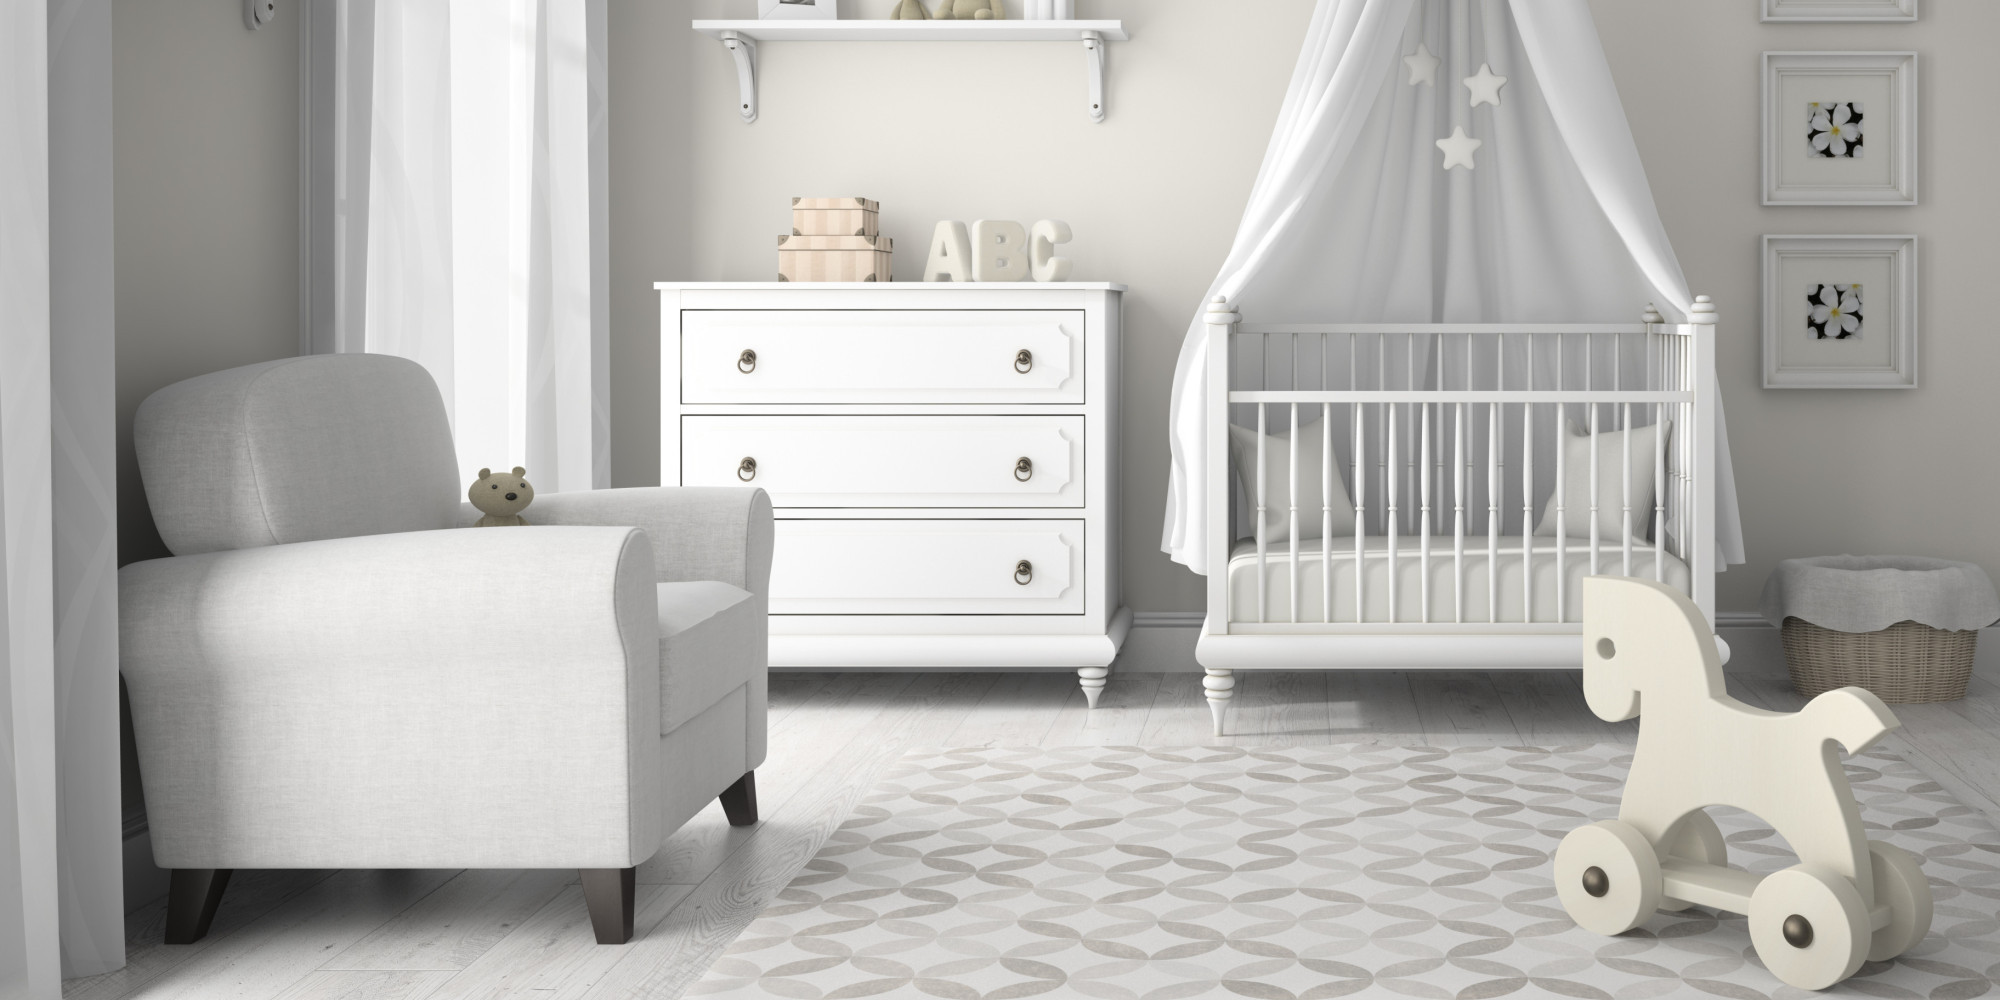 Baby Crib Decoration Ideas
 How To Decorate Your Baby s Nursery In A Day